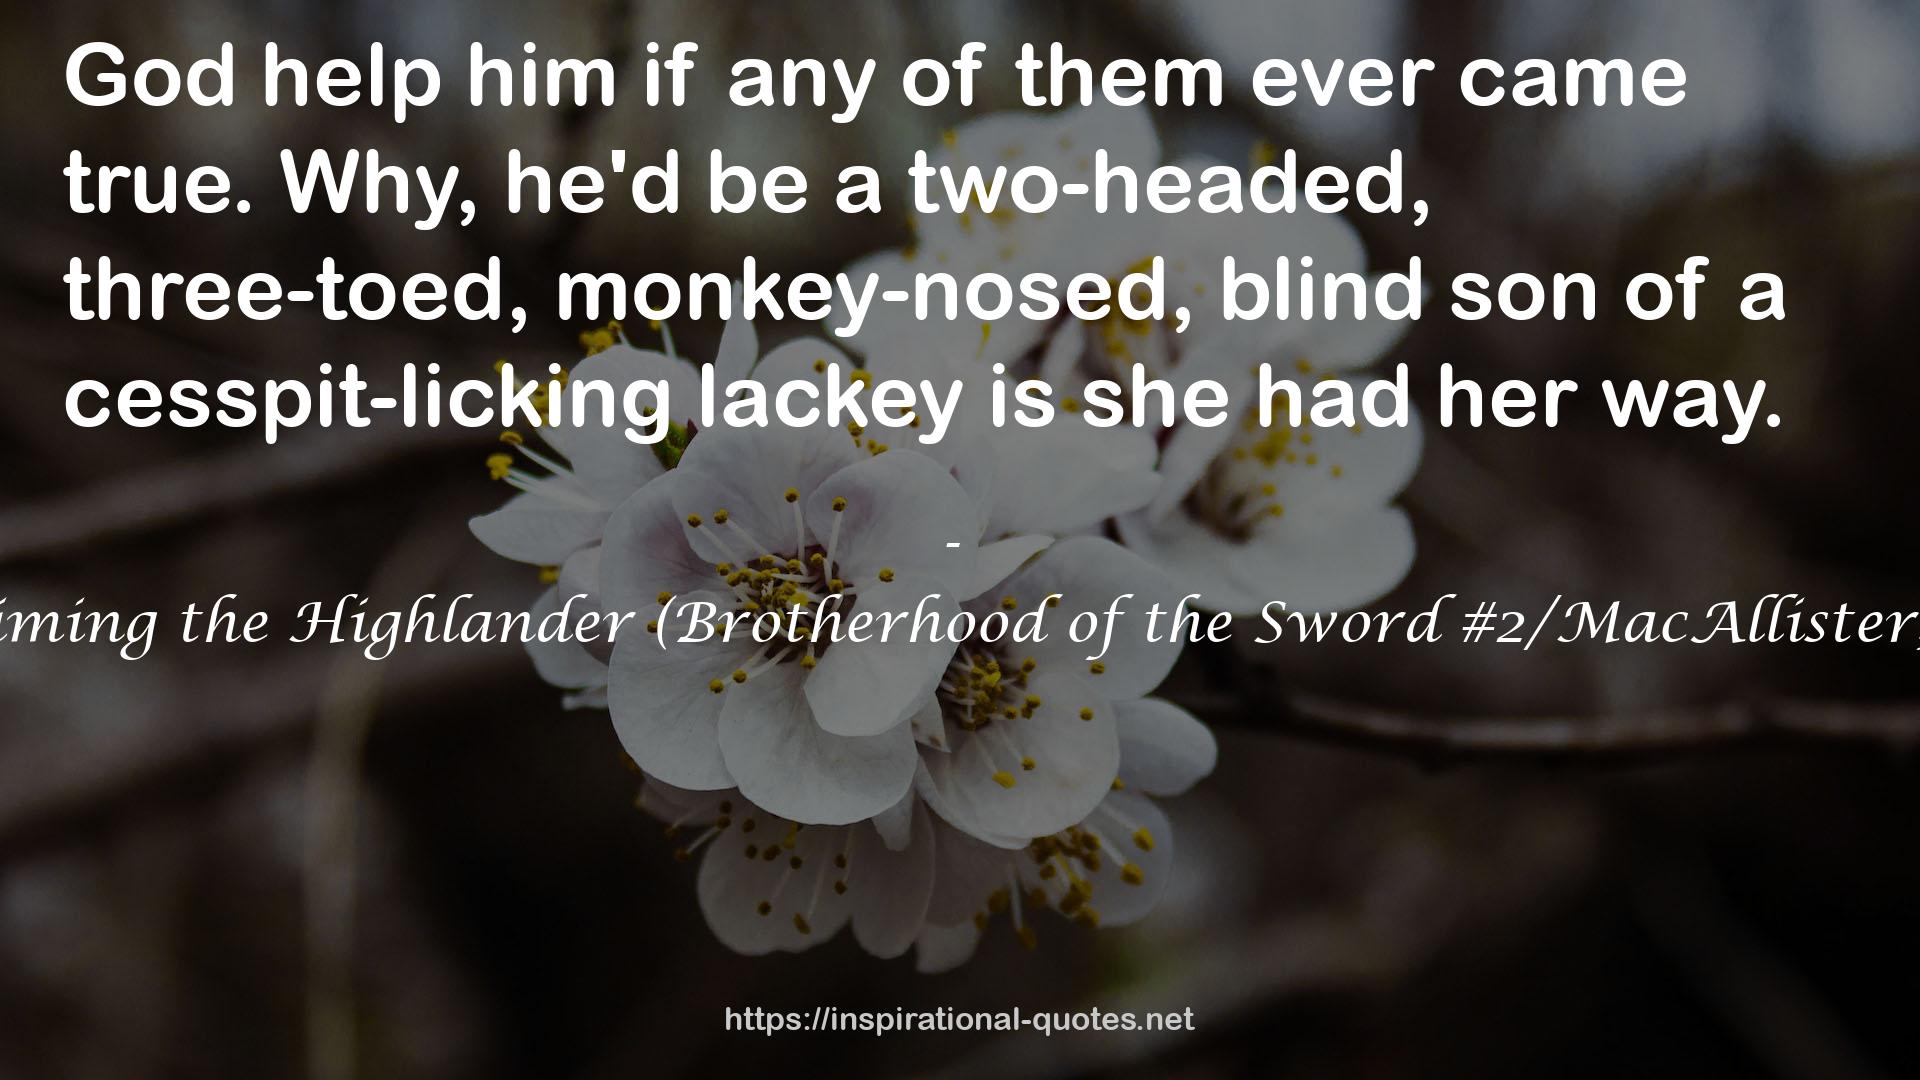 Claiming the Highlander (Brotherhood of the Sword #2/MacAllister, #1) QUOTES